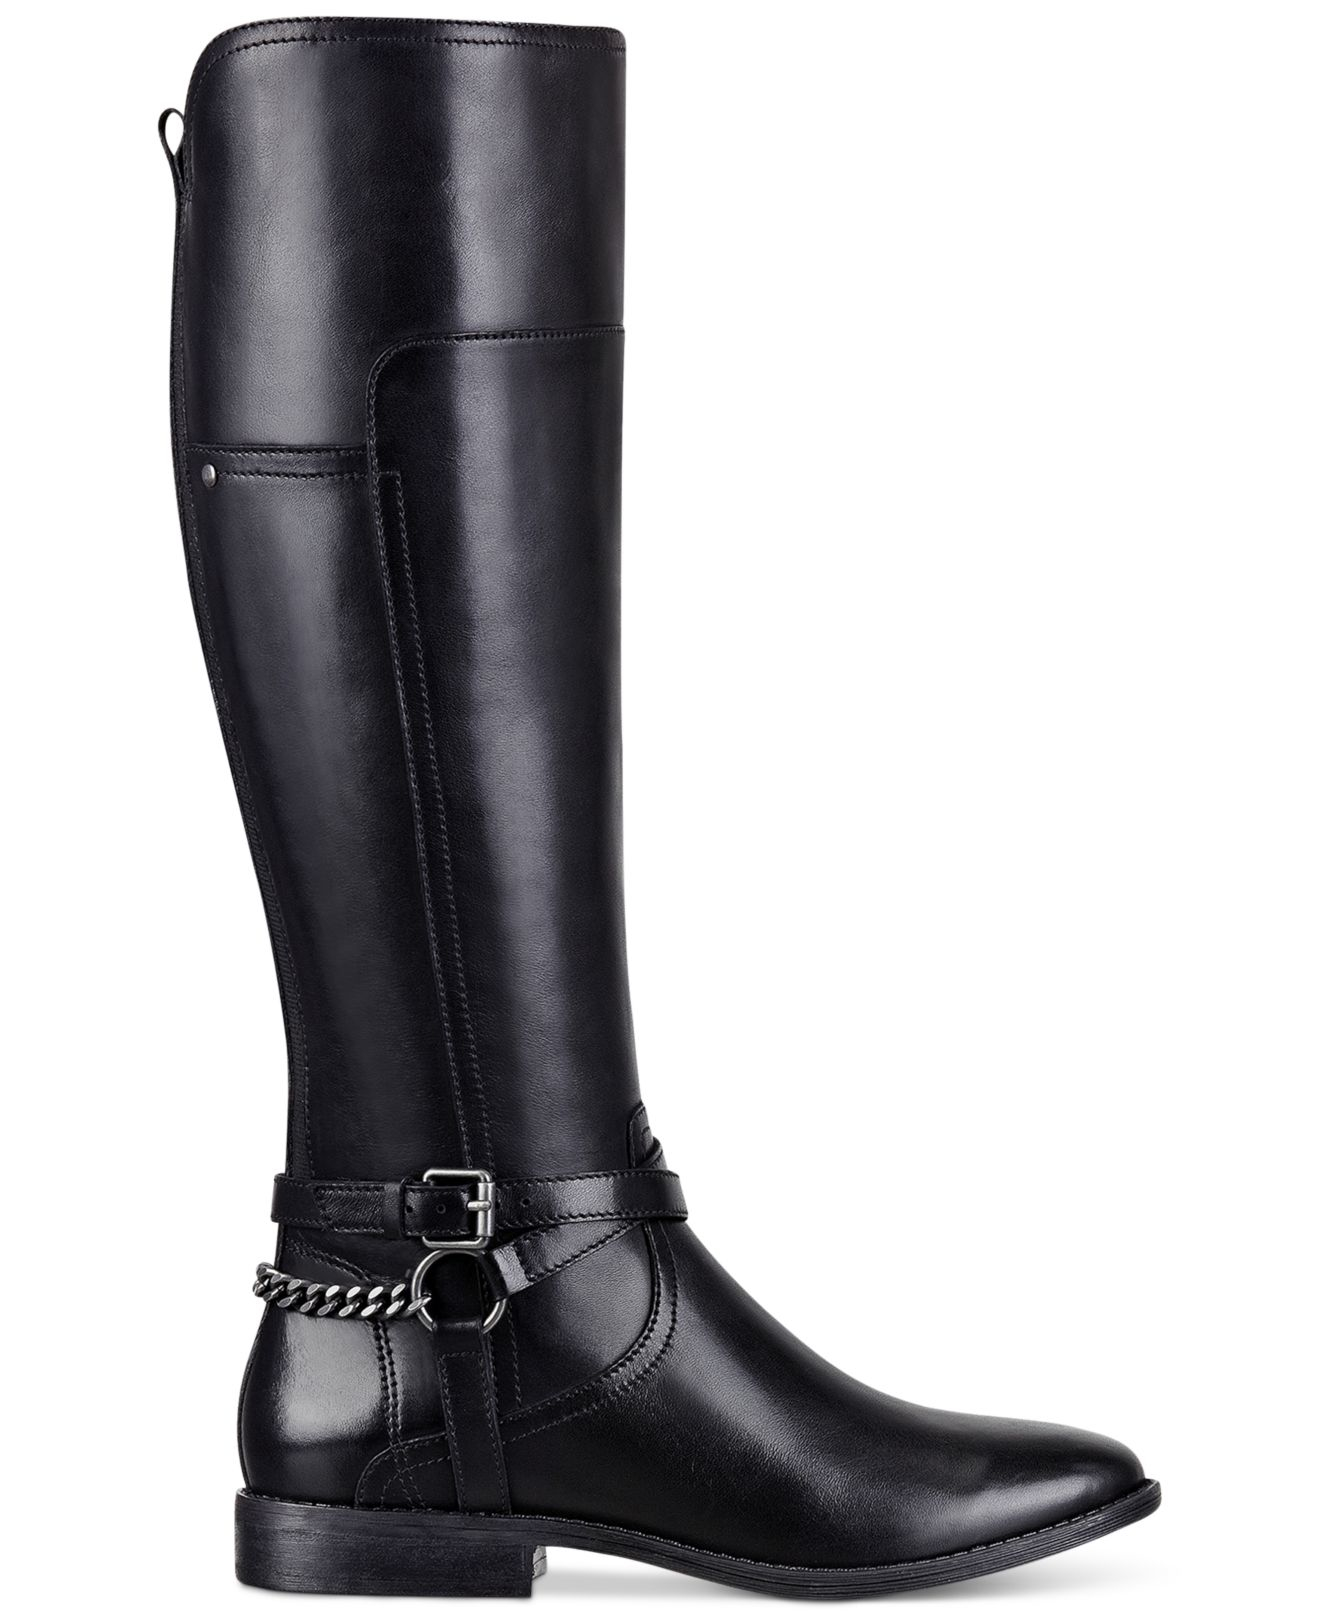 Lyst - Marc Fisher Alexis Wide Calf Tall Riding Boots in Black